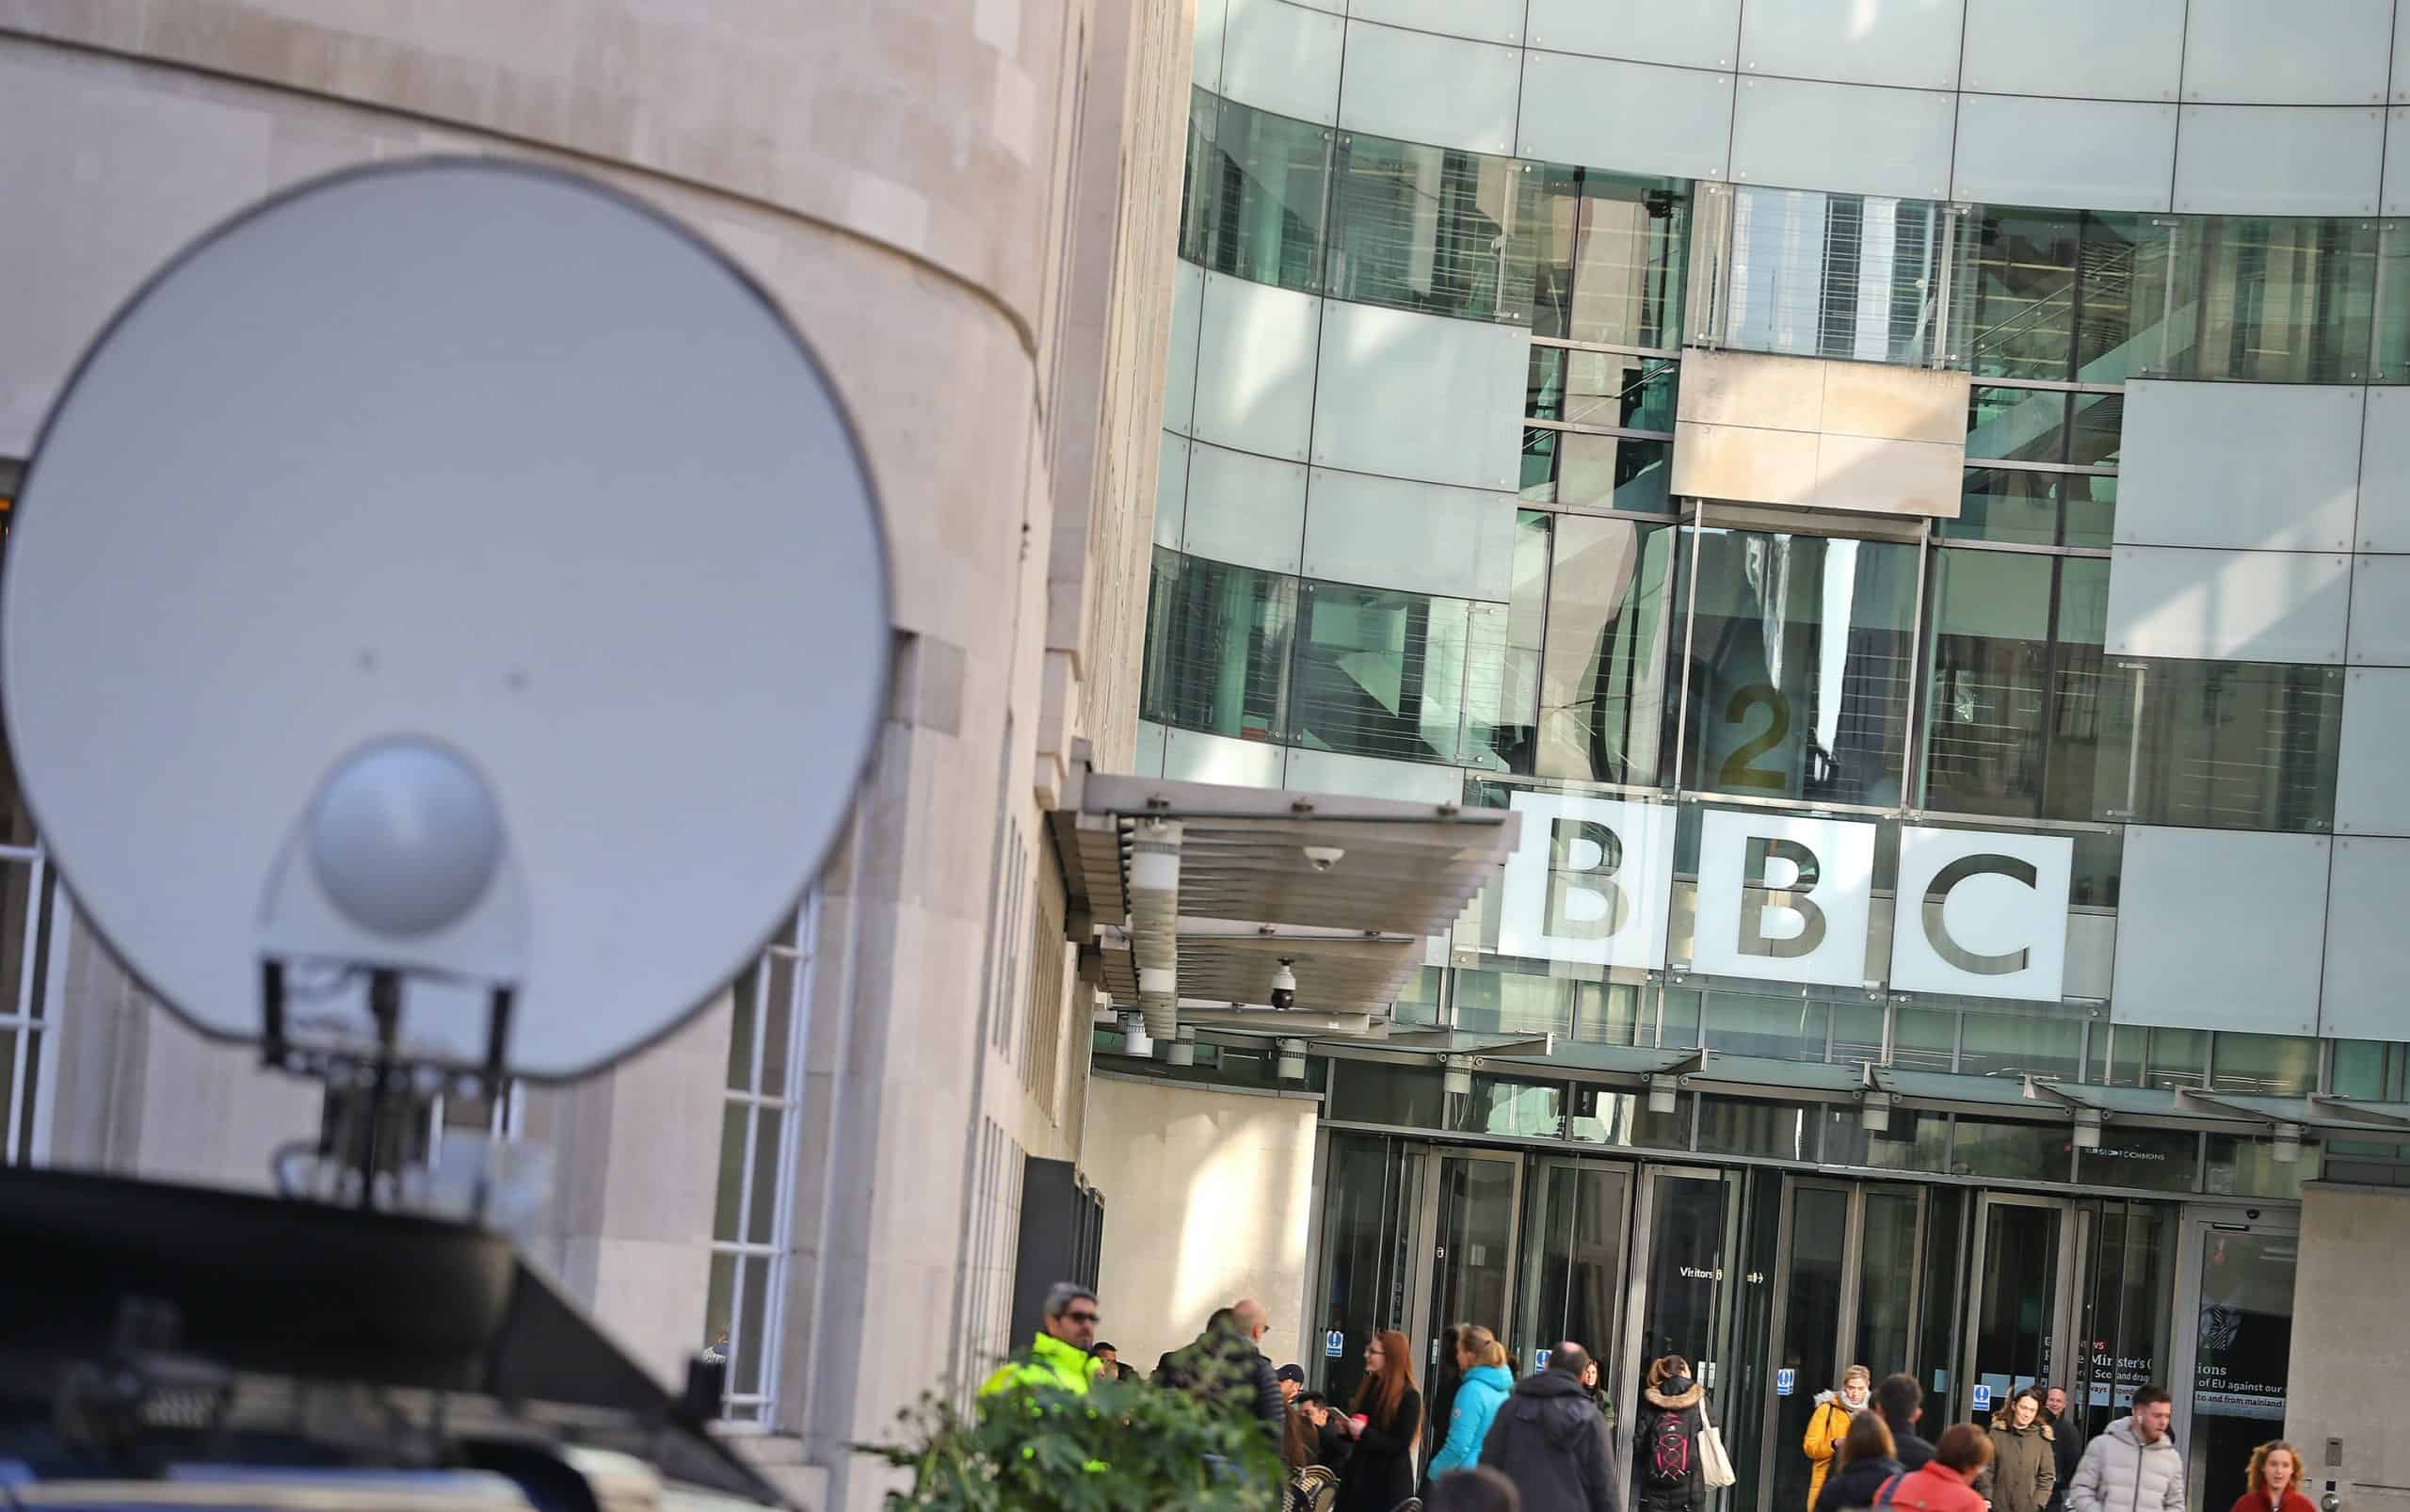 Carrie Gracie hits out at ‘whitewash’ investigation into BBC equal pay